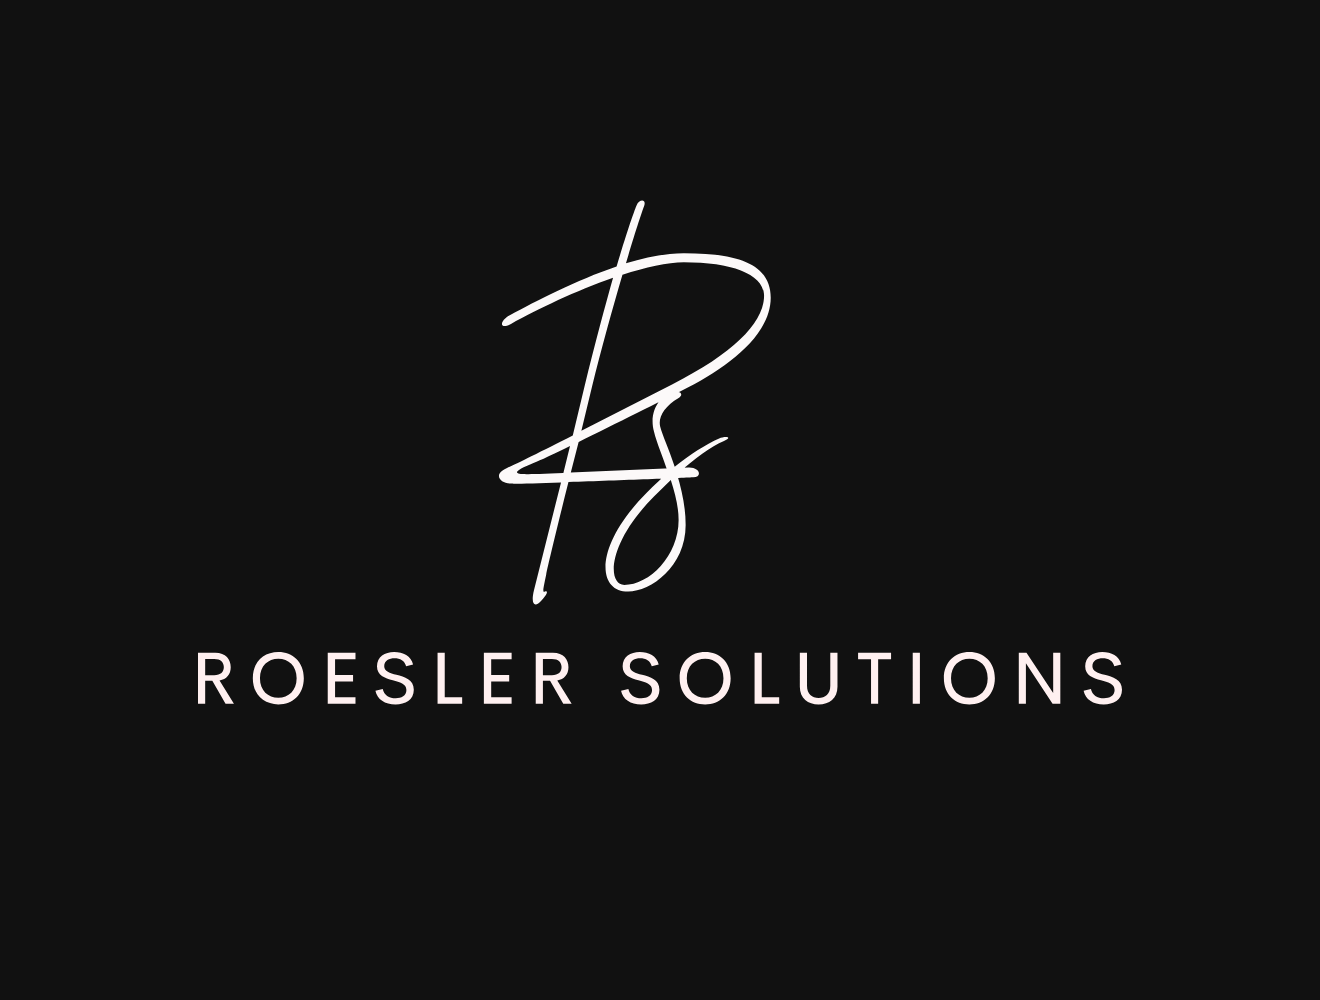 Roesler Solutions